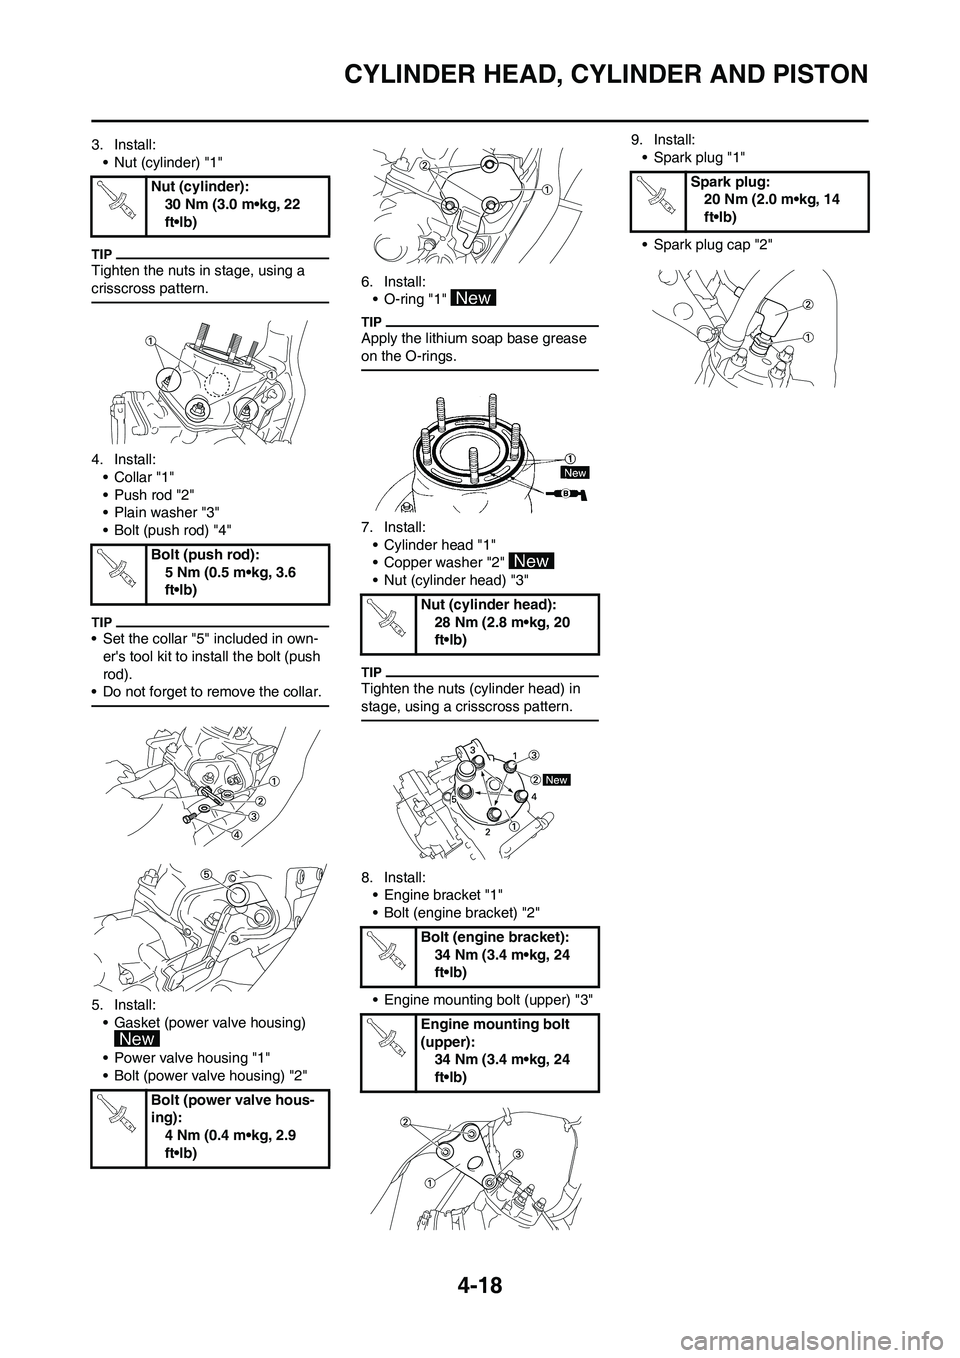 YAMAHA YZ125LC 2011  Owners Manual 4-18
CYLINDER HEAD, CYLINDER AND PISTON
3. Install:
• Nut (cylinder) "1"
Tighten the nuts in stage, using a 
crisscross pattern.
4. Install:
•Collar "1"
• Push rod "2"
• Plain washer "3" 
• 